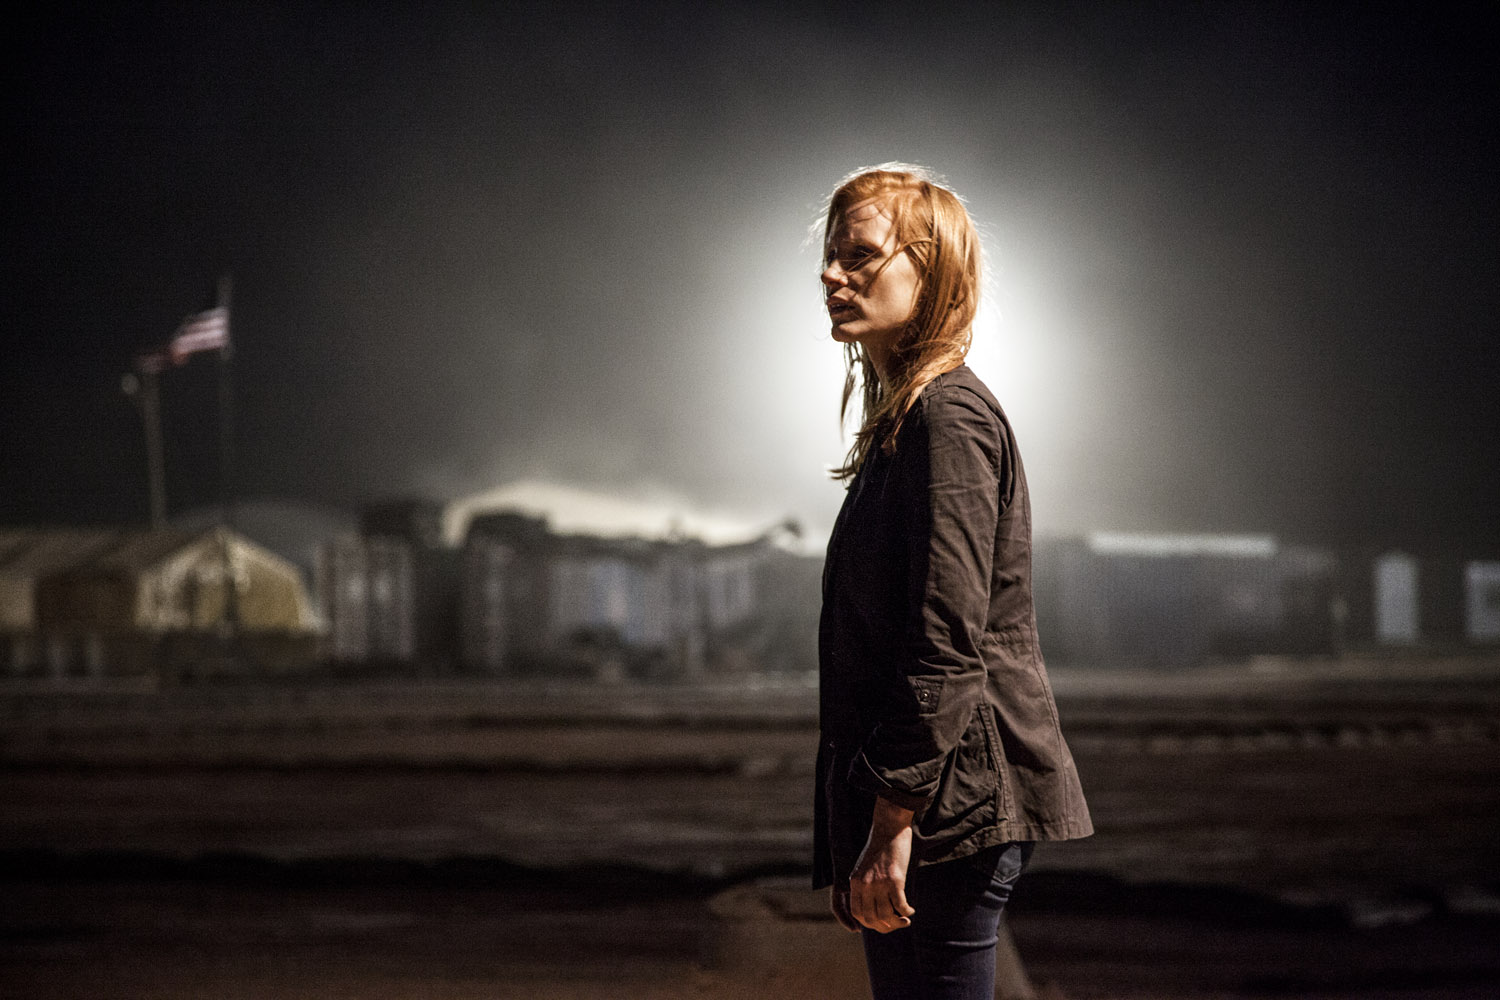 Jessica Chastain plays a member of the elite team of spies and military operatives who secretly devoted themselves to finding Osama Bin Laden in Zero Dark Thirty.